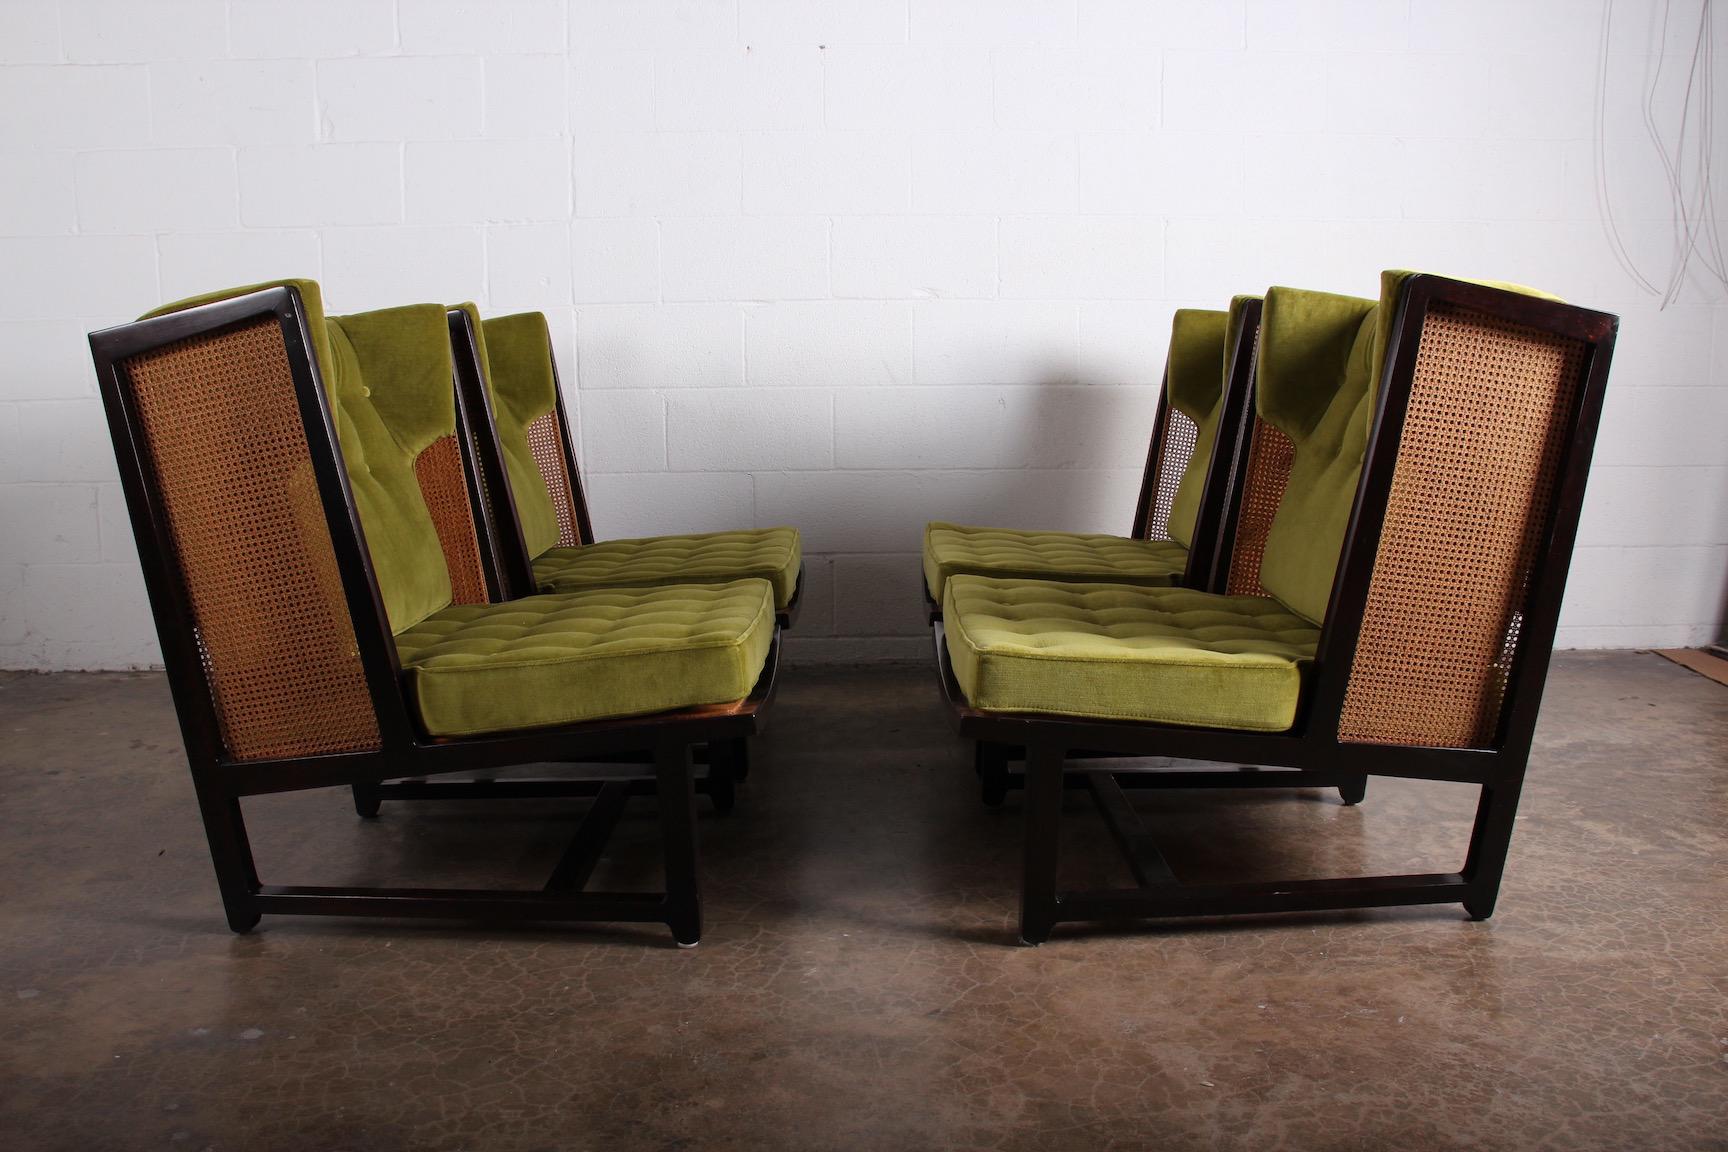 Mid-20th Century Pair of Cane Back Wing Chairs by Edward Wormley for Dunbar